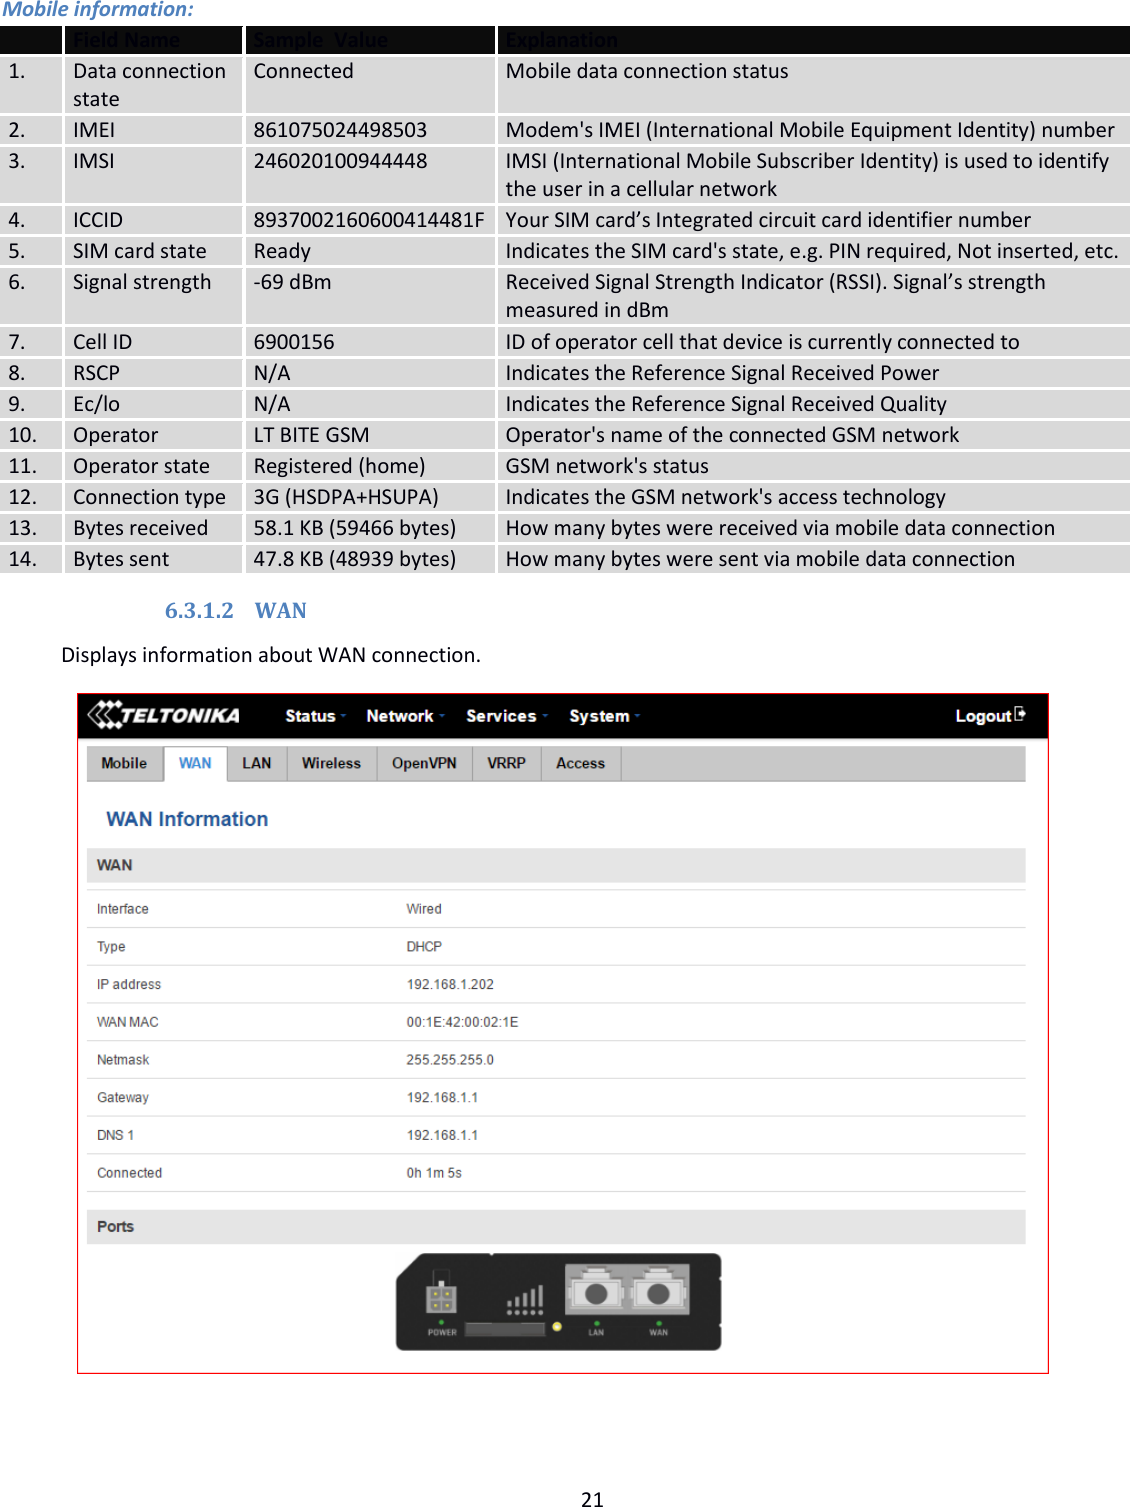  21  Mobile information:  Field Name Sample  Value Explanation 1. Data connection state Connected Mobile data connection status 2. IMEI 861075024498503 Modem&apos;s IMEI (International Mobile Equipment Identity) number 3. IMSI 246020100944448 IMSI (International Mobile Subscriber Identity) is used to identify  the user in a cellular network 4. ICCID 8937002160600414481F Your SIM card’s Integrated circuit card identifier number 5. SIM card state Ready Indicates the SIM card&apos;s state, e.g. PIN required, Not inserted, etc. 6. Signal strength -69 dBm Received Signal Strength Indicator (RSSI). Signal’s strength  measured in dBm 7. Cell ID 6900156 ID of operator cell that device is currently connected to 8. RSCP N/A Indicates the Reference Signal Received Power 9. Ec/lo N/A Indicates the Reference Signal Received Quality 10. Operator LT BITE GSM Operator&apos;s name of the connected GSM network 11. Operator state Registered (home) GSM network&apos;s status 12. Connection type 3G (HSDPA+HSUPA) Indicates the GSM network&apos;s access technology 13. Bytes received 58.1 KB (59466 bytes) How many bytes were received via mobile data connection 14. Bytes sent 47.8 KB (48939 bytes) How many bytes were sent via mobile data connection 6.3.1.2 WAN Displays information about WAN connection.    